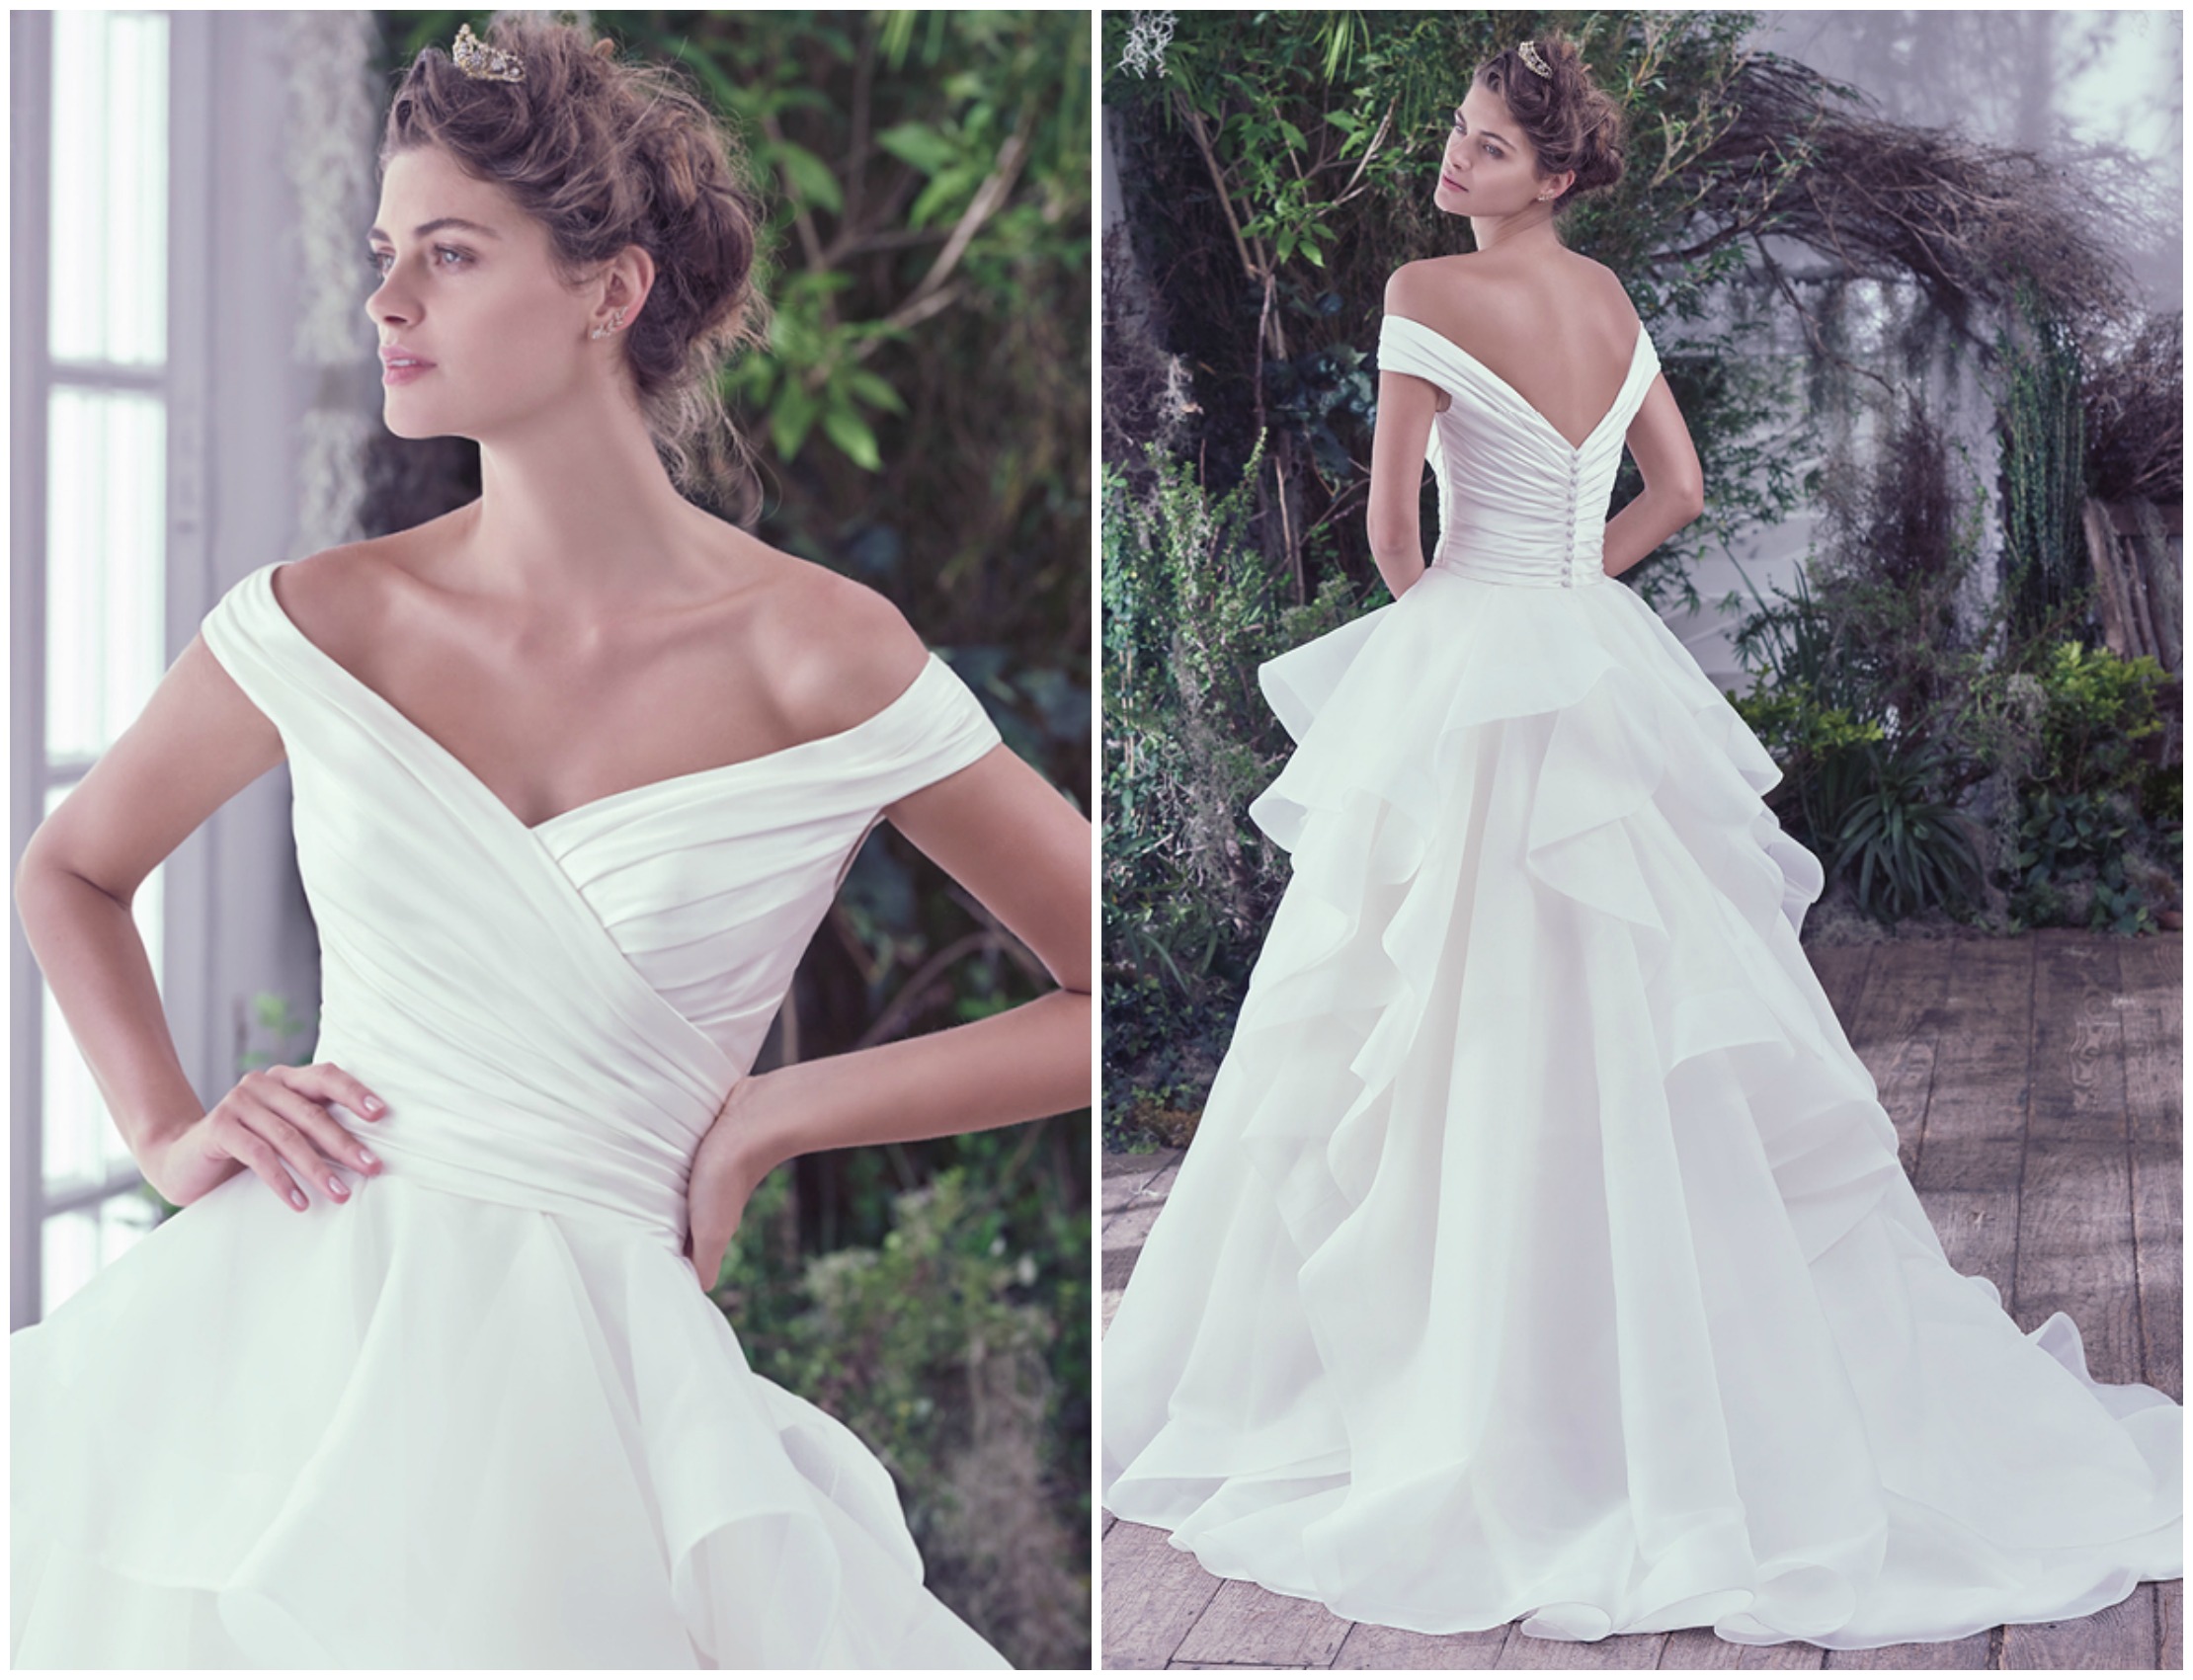 Asymmetrically pleated L’Amour satin creates a refined fitted bodice before flaring into a sculptured Venice organza ball gown skirt featuring horsehair edged layers. Off-the-shoulder sleeves create a portrait neckline flaunting an exquisitely romantic style. Finished with covered buttons over zipper closure.

<a href="https://www.maggiesottero.com/maggie-sottero/zulani/9752" target="_blank">Maggie Sottero</a>